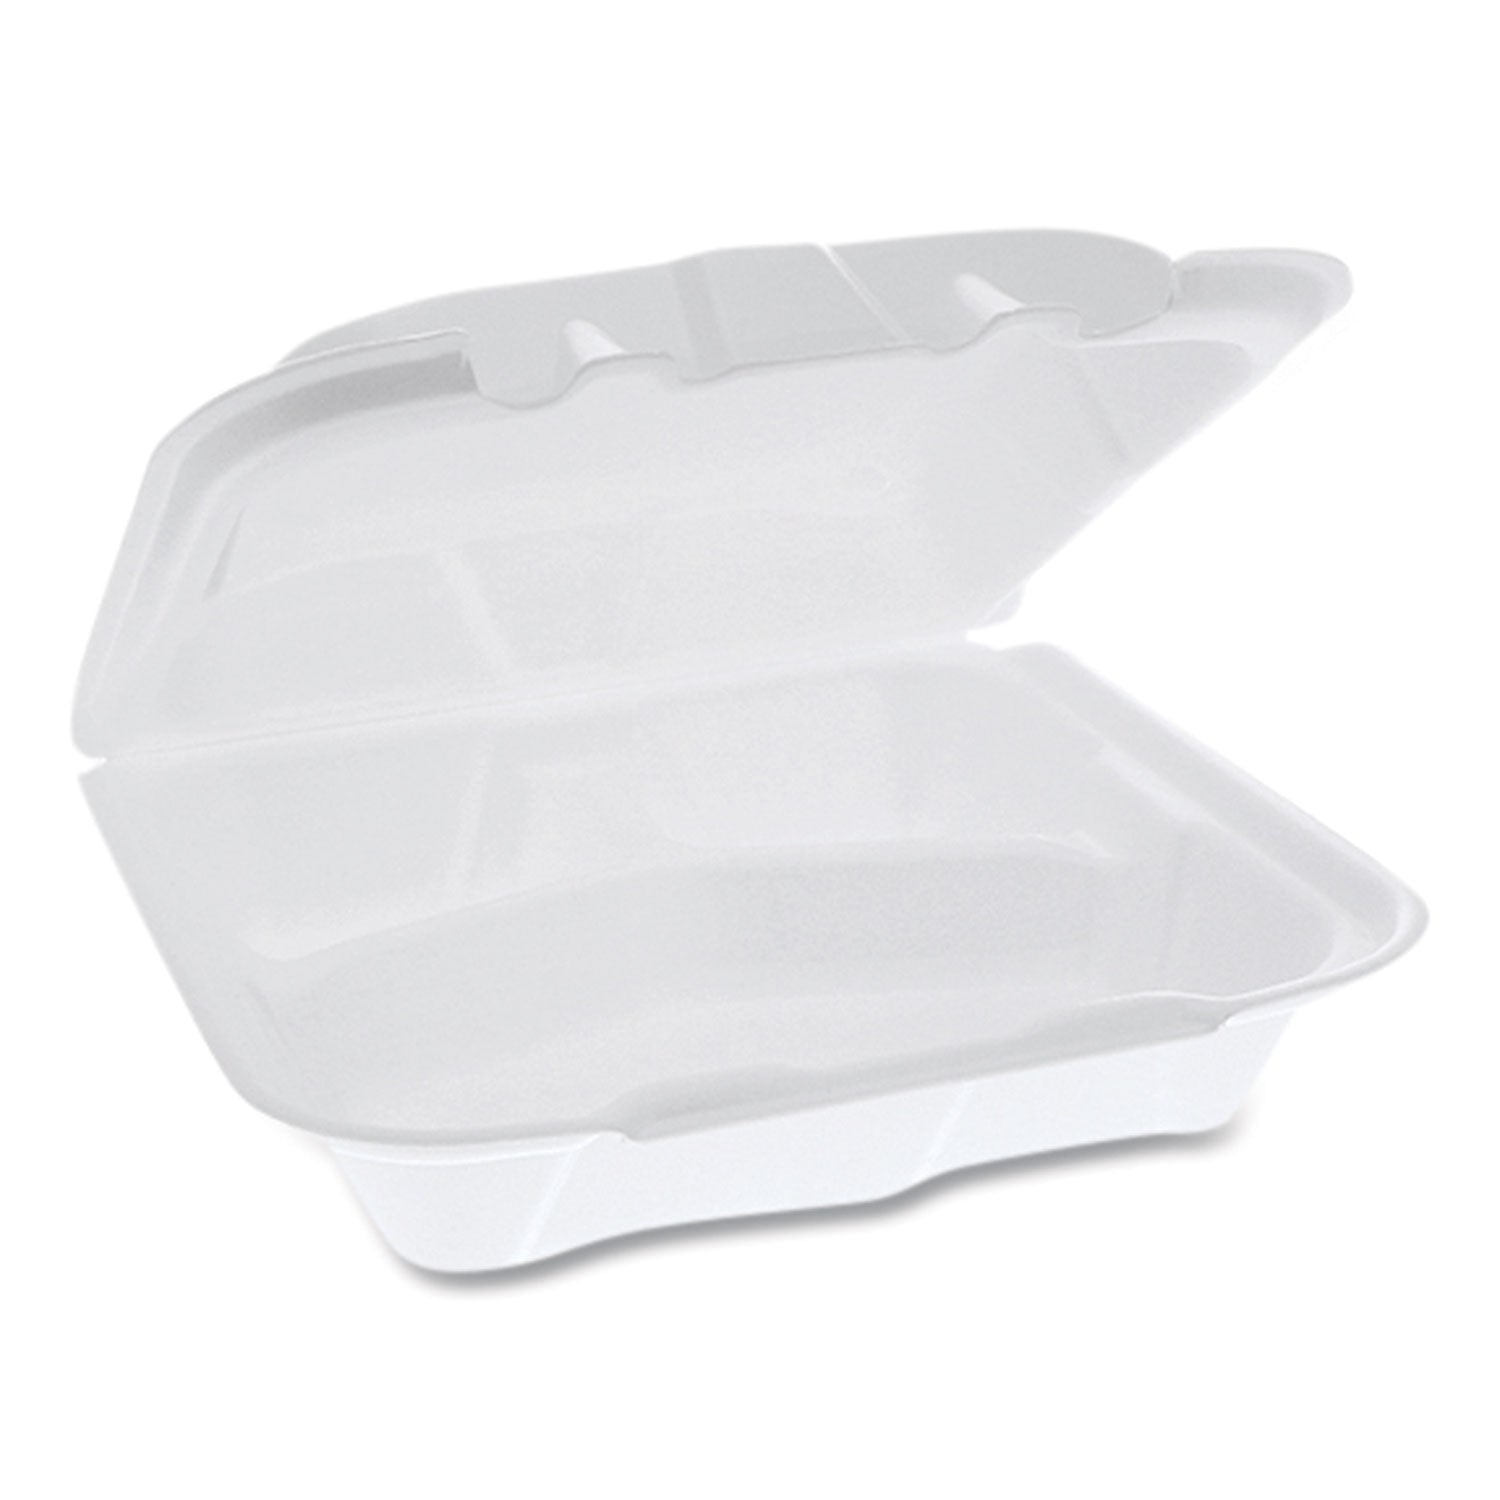 vented-foam-hinged-lid-container-dual-tab-lock-3-compartment-842-x-815-x-3-white-150-carton_pctytd188030000 - 2